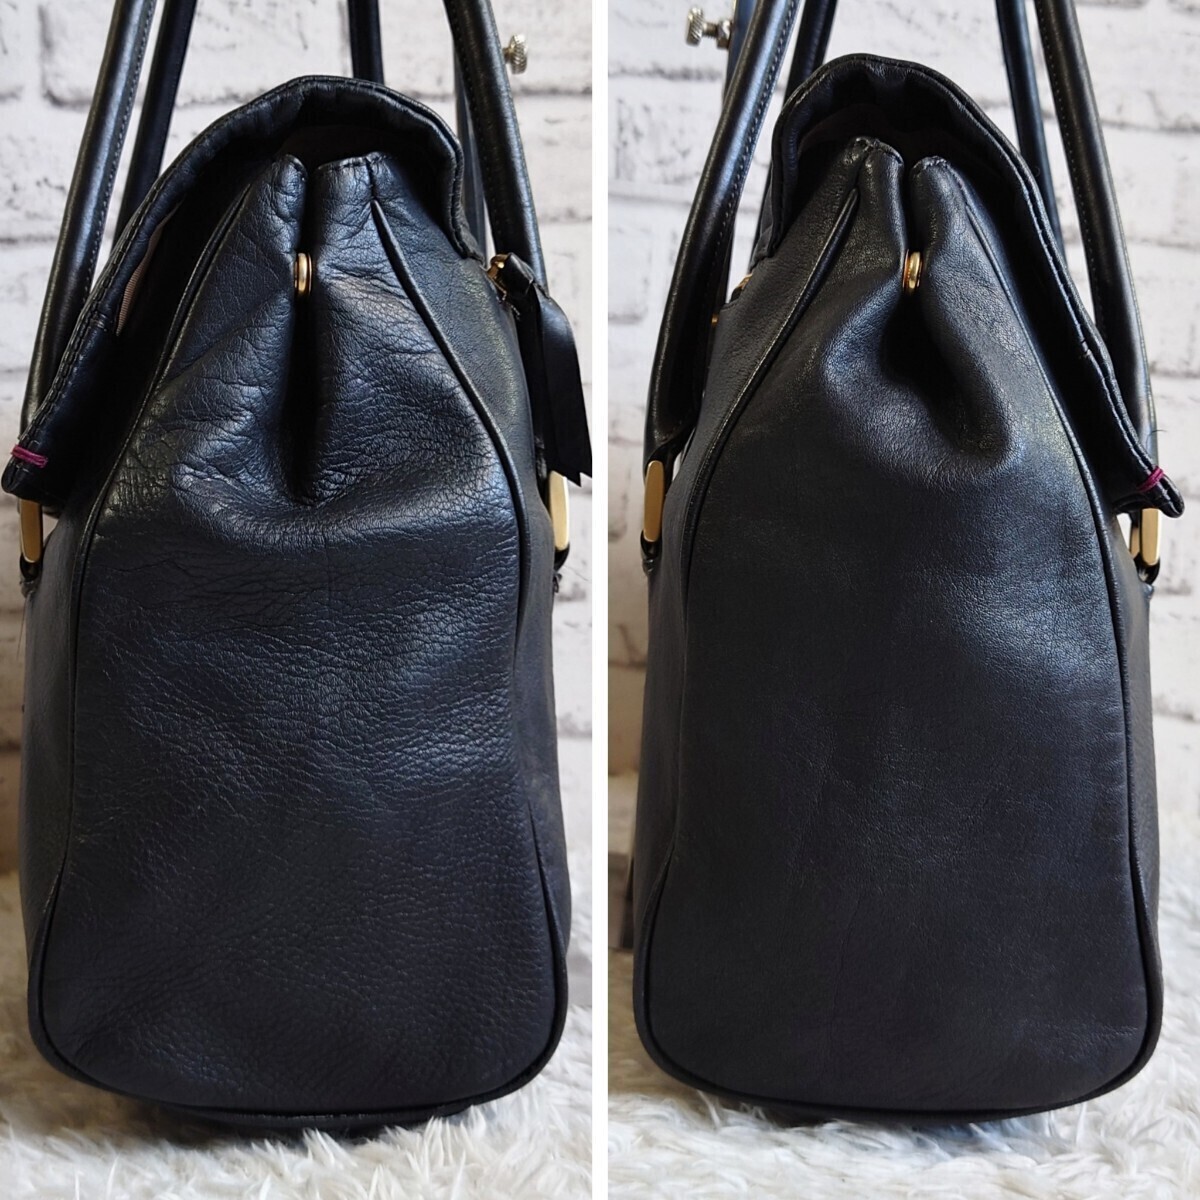  close year of model Paul Smith Paul Smith tote bag shoulder ..A4 storage possibility commuting business leather leather black black Logo metal fittings Gold men's 